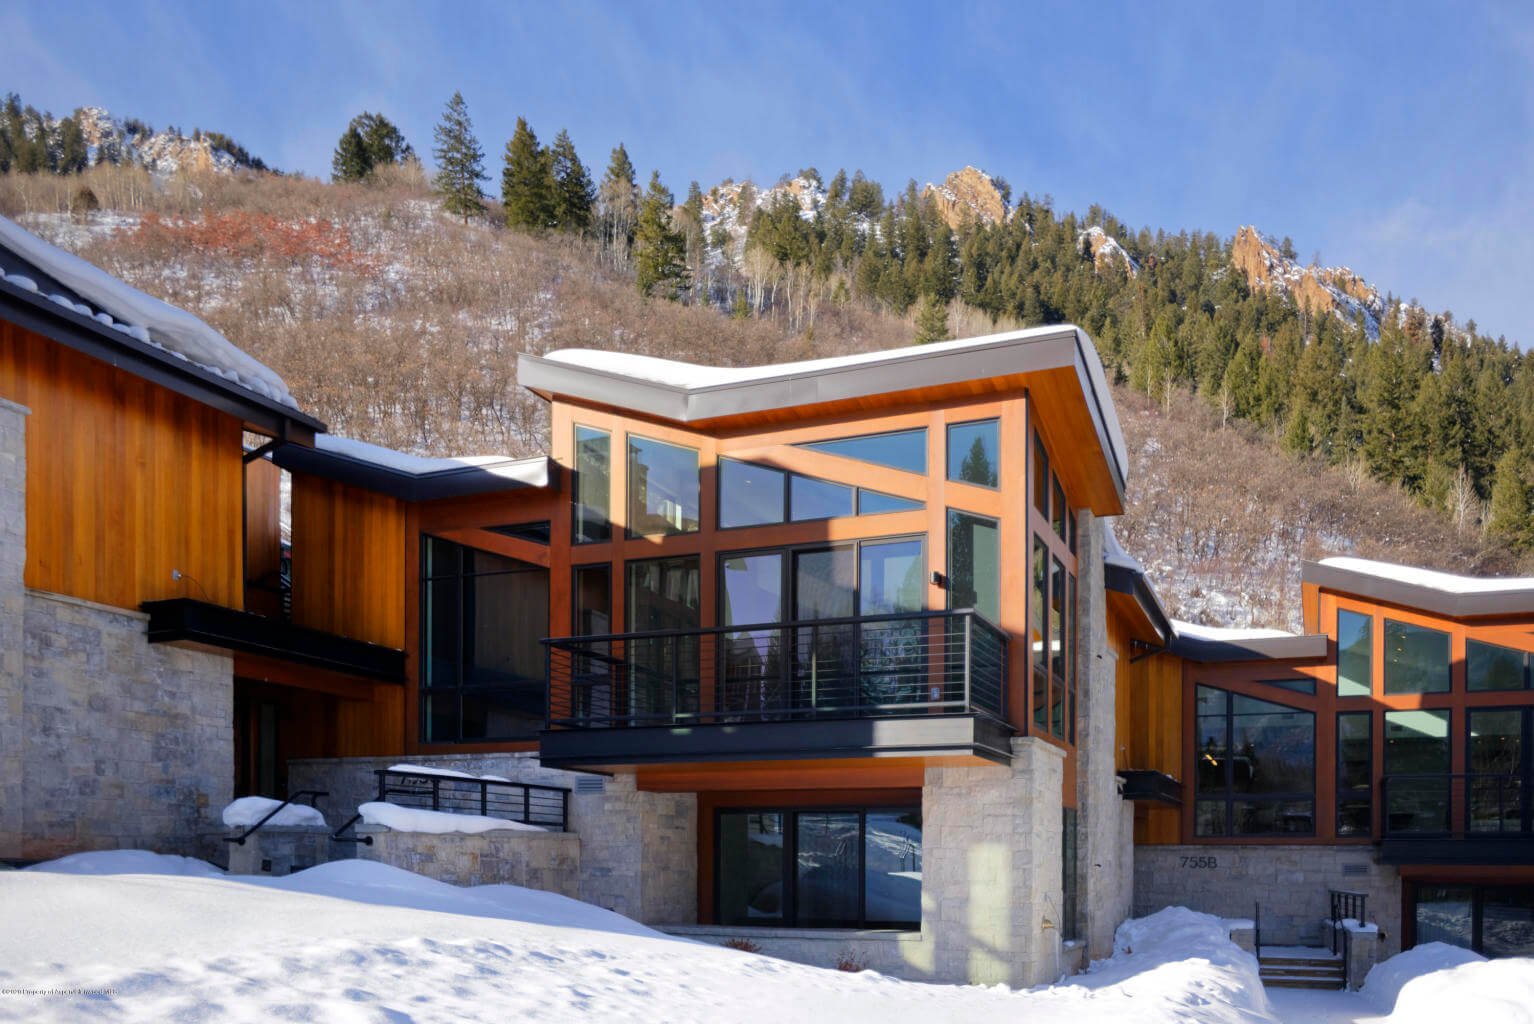 OneAspen Townhome at 755 S Aspen St Unit B Sells for $13.89M/$2,346 SF Unfurn. Image